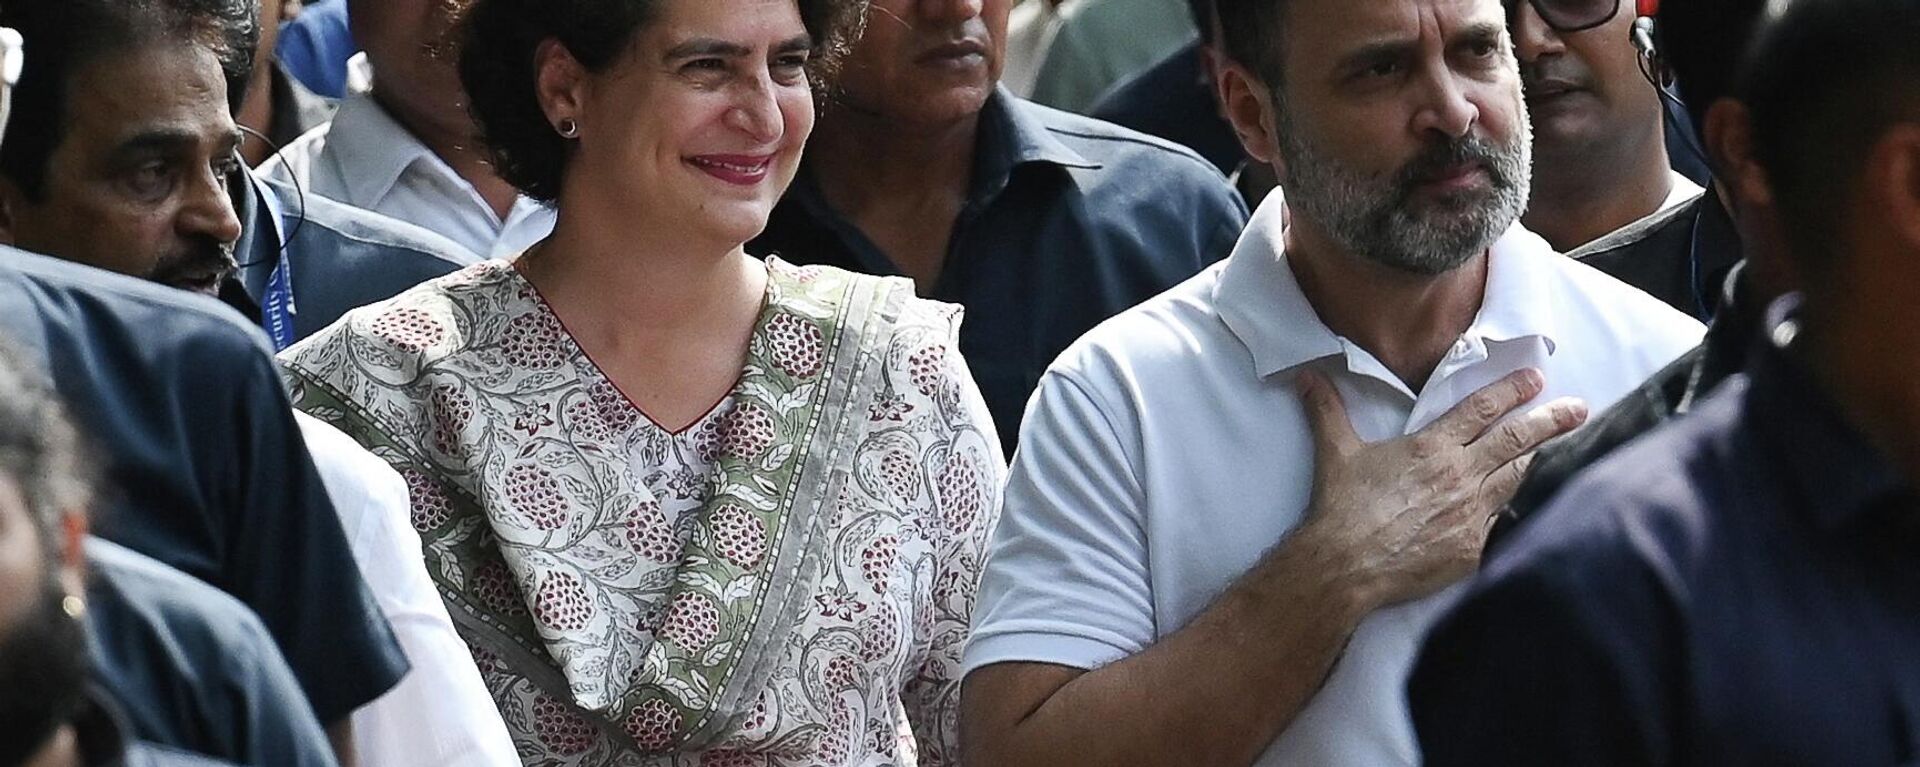 Congress party leader Rahul Gandhi (centre R) arrives with Priyanka Gandhi Vadra (centre L) at the party headquarters in New Delhi on August 4, 2023, after the Supreme Court suspended his defamation conviction. India's top court on August 4 suspended the defamation conviction of Rahul Gandhi, a decision that could pave the way for the senior opposition politician to return to parliament after his disqualification.  - Sputnik India, 1920, 20.08.2023